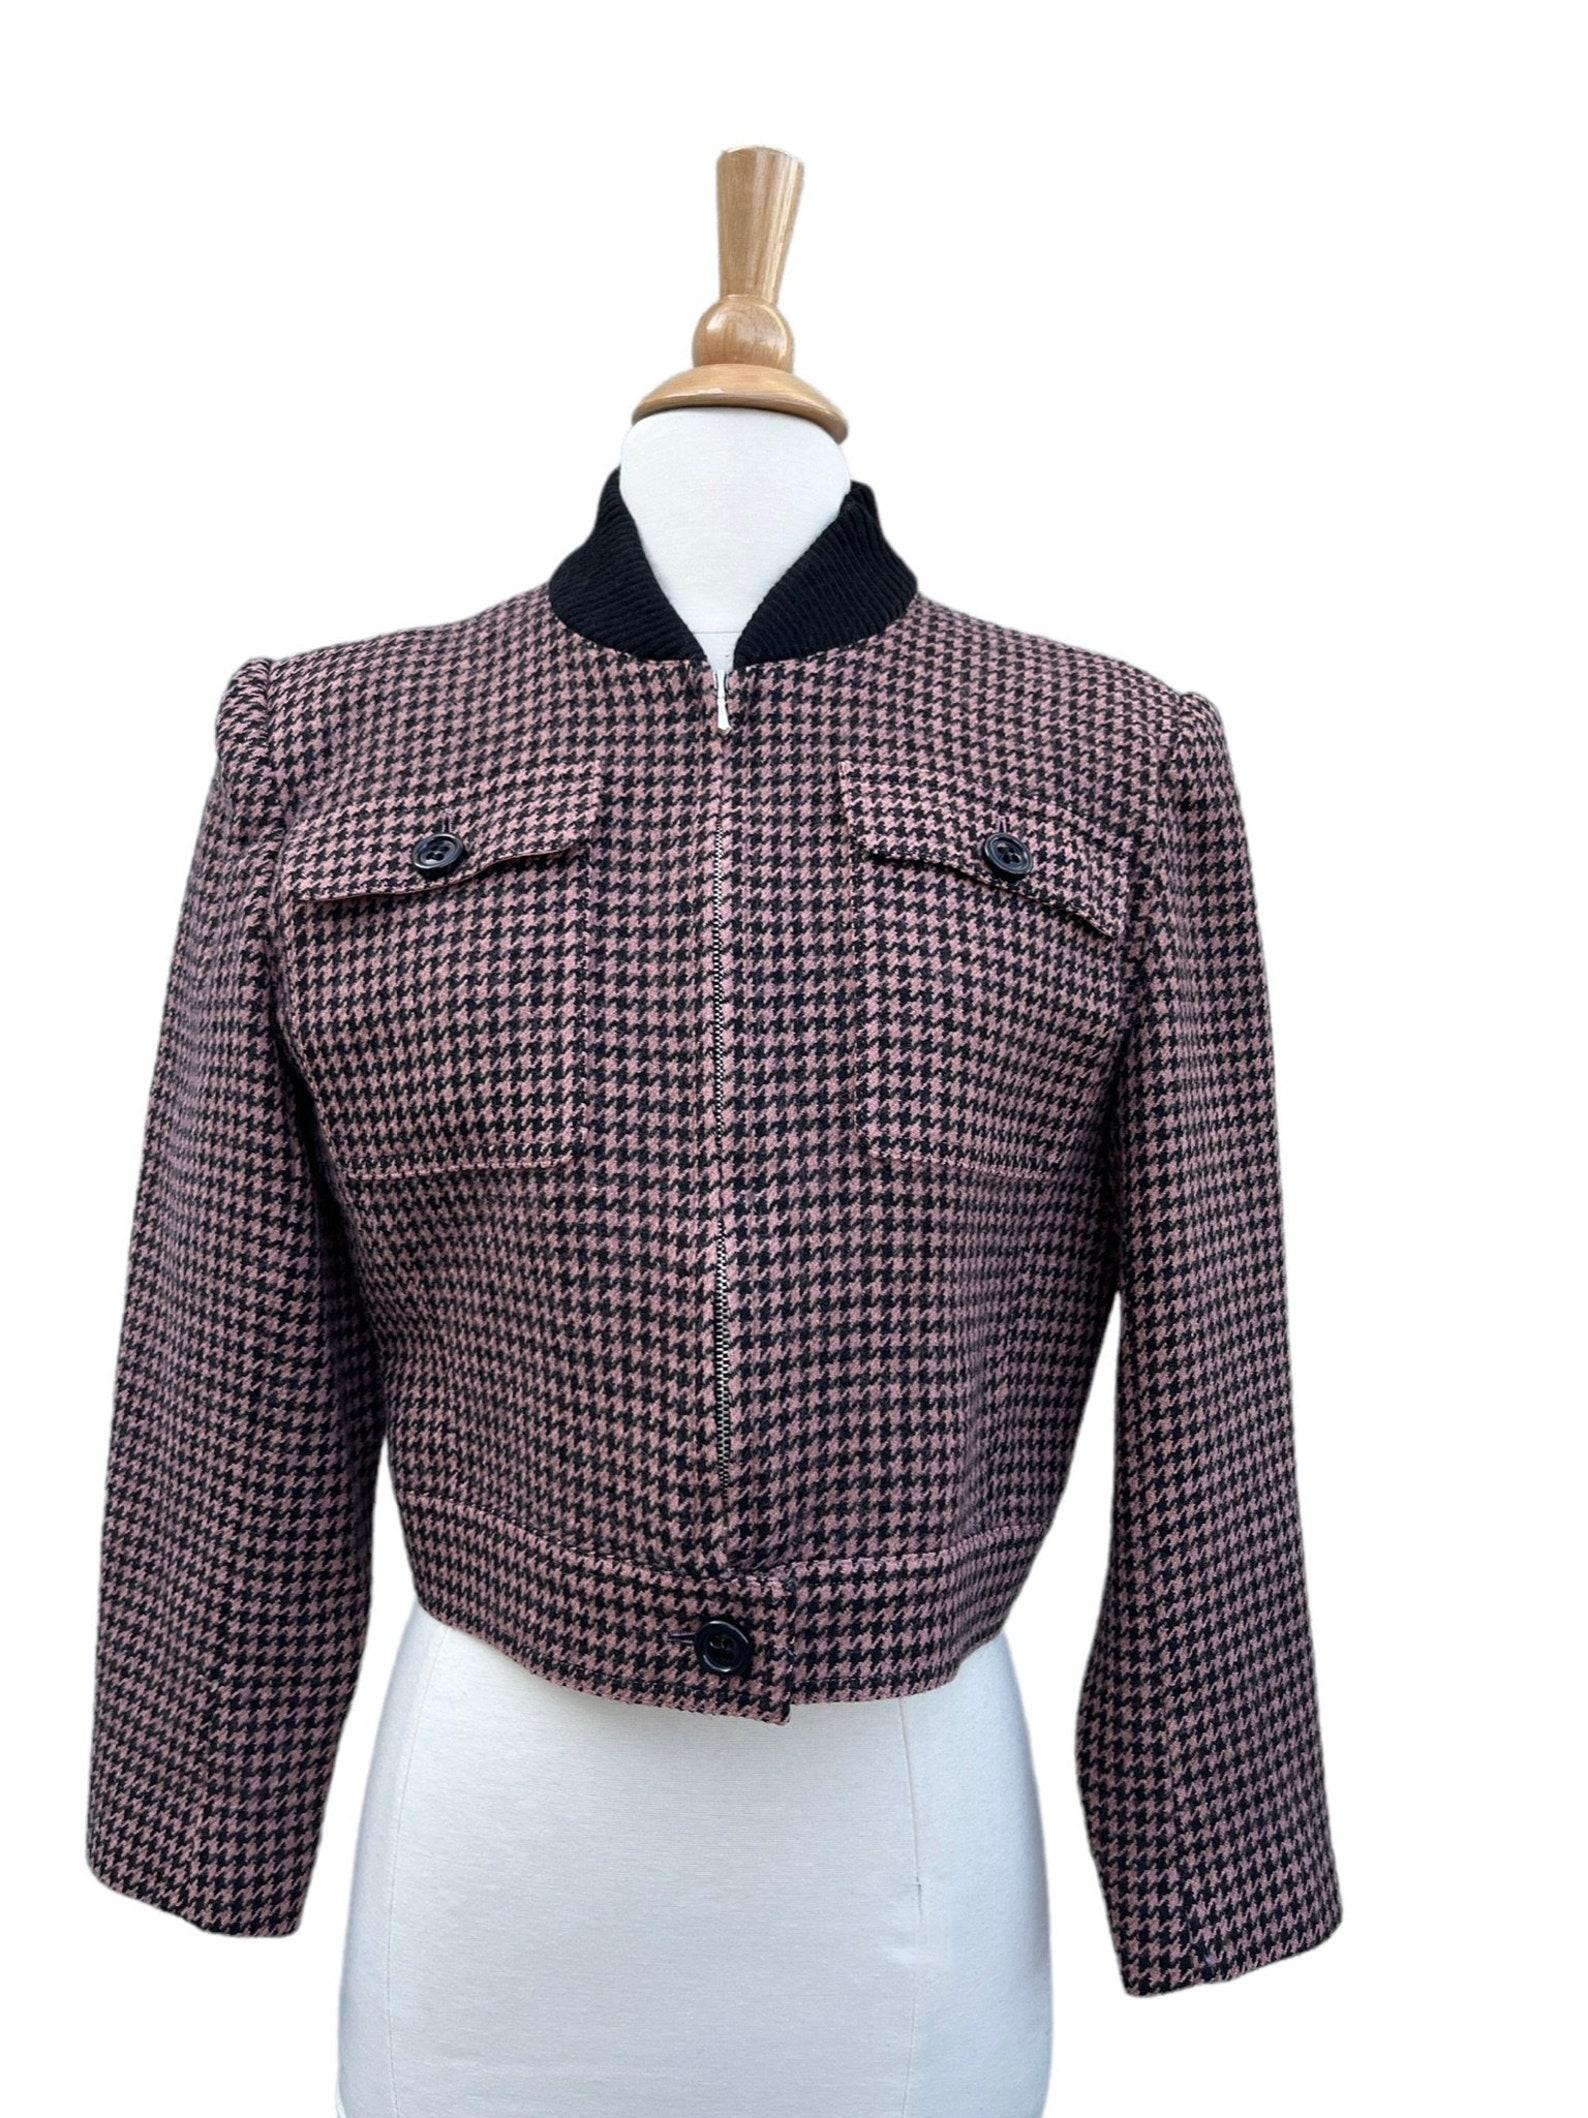 Guy Laroche houndstooth jacket For Sale 2